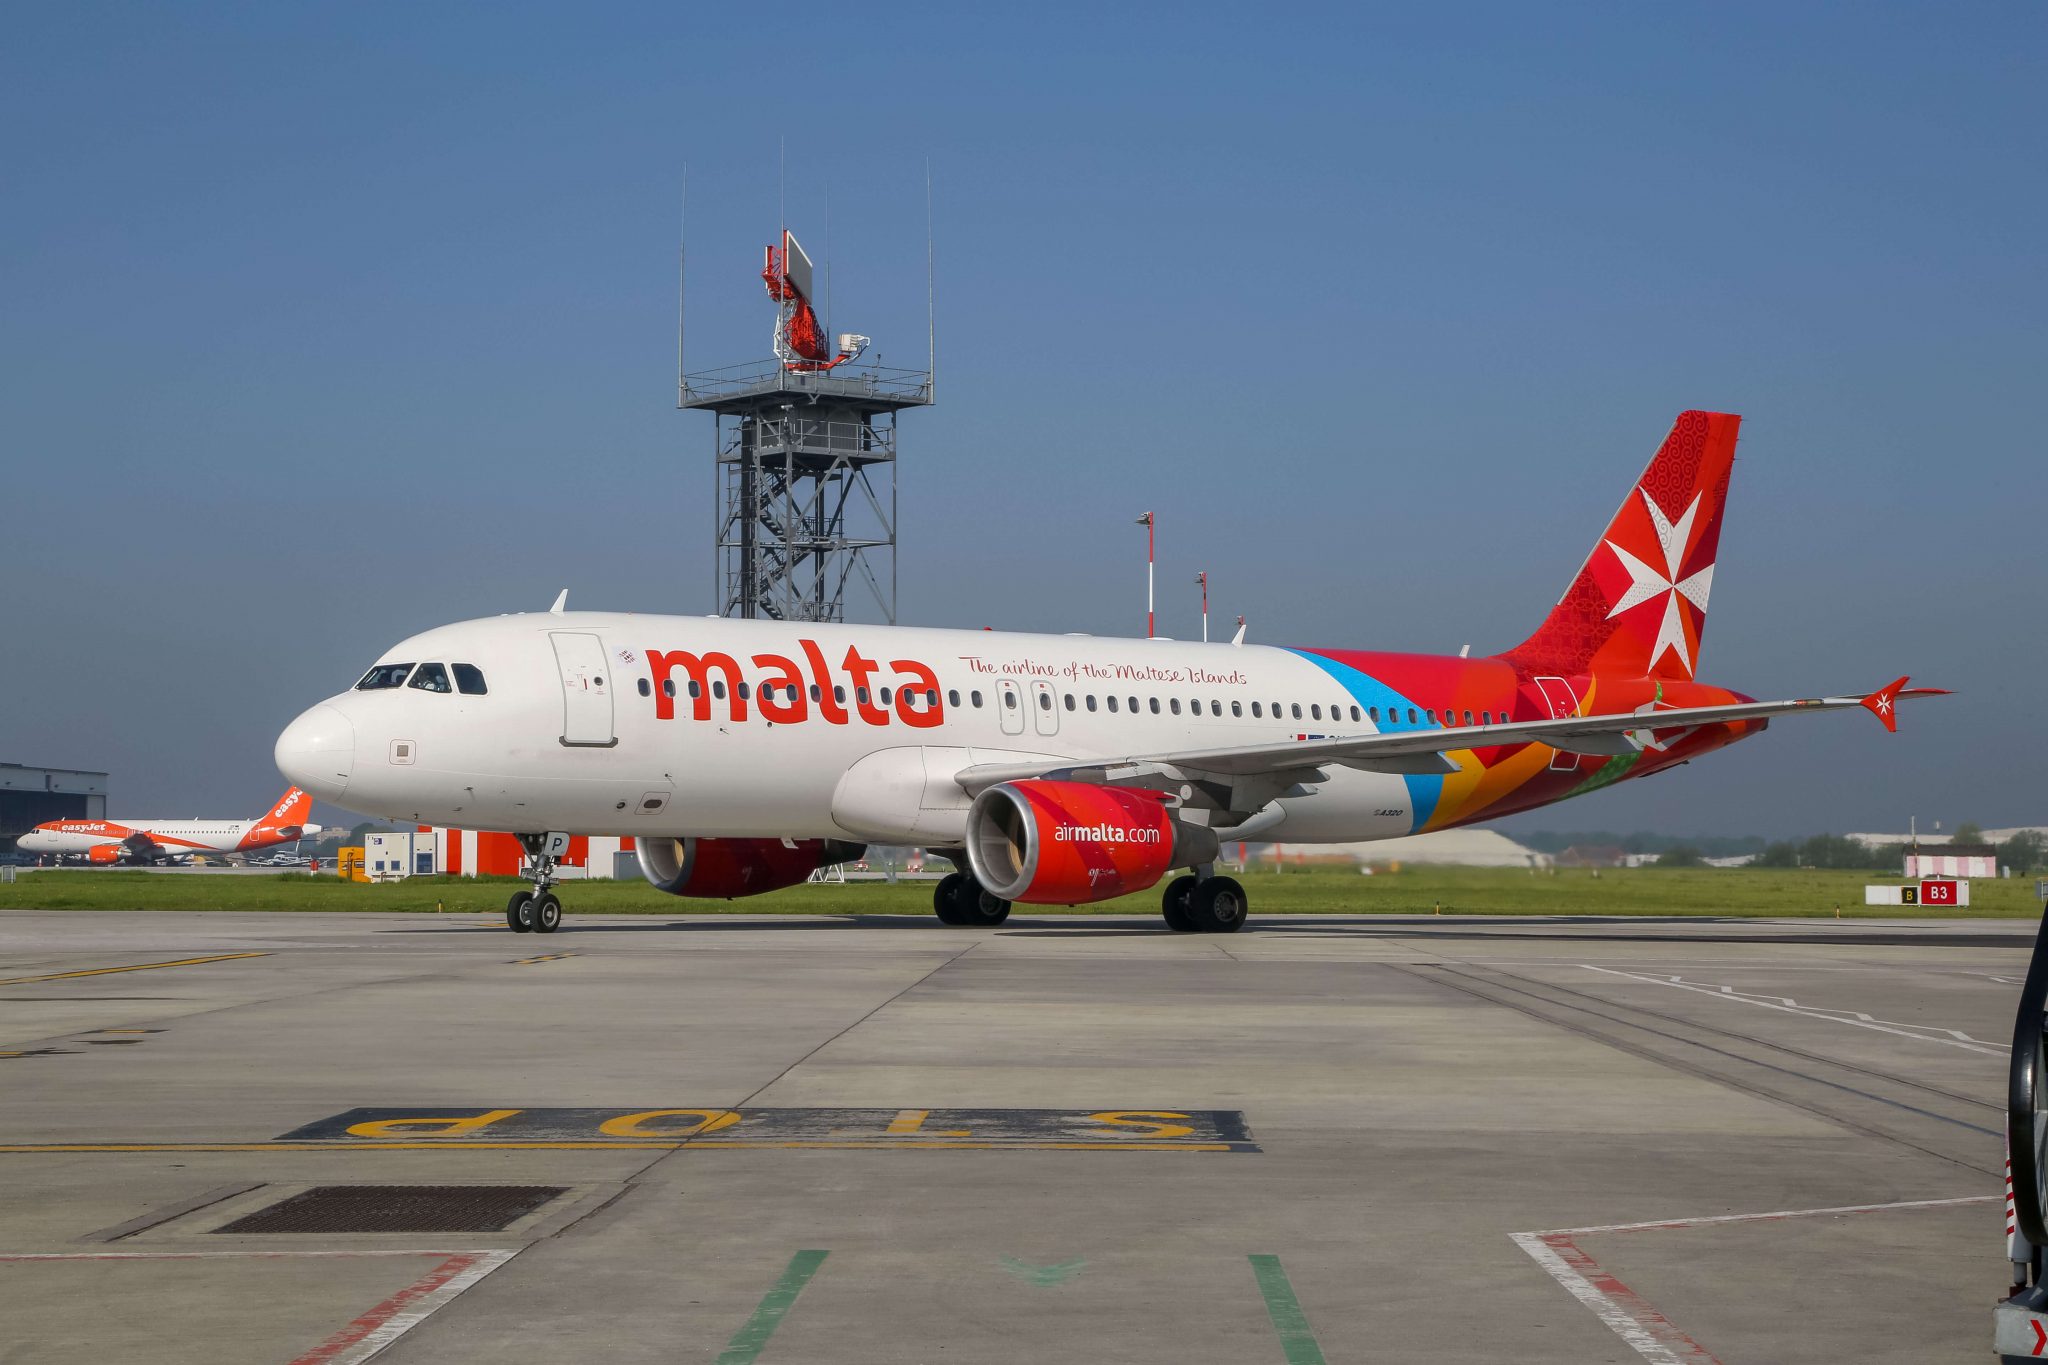 Air Malta’s new Airbus A320neo joins its fleet